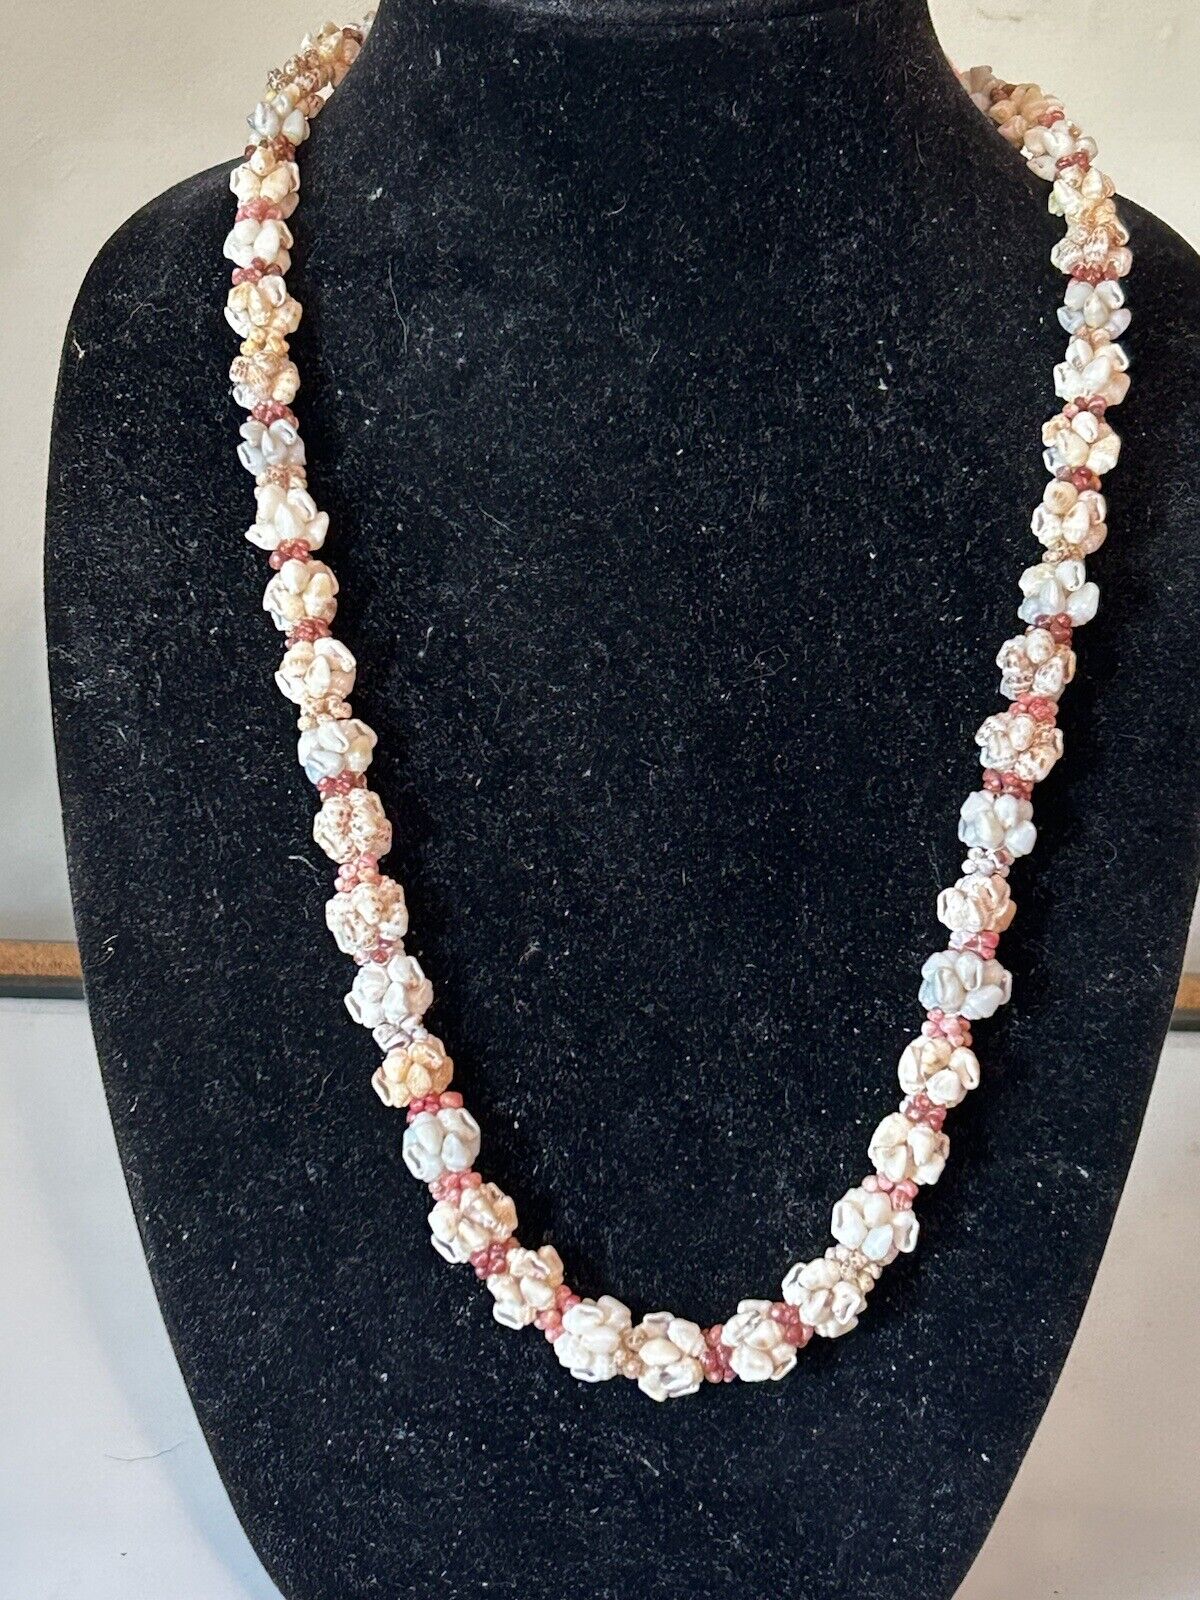 Gorgeous Double Crown Flower Niihau Necklace. 27 Inches Long